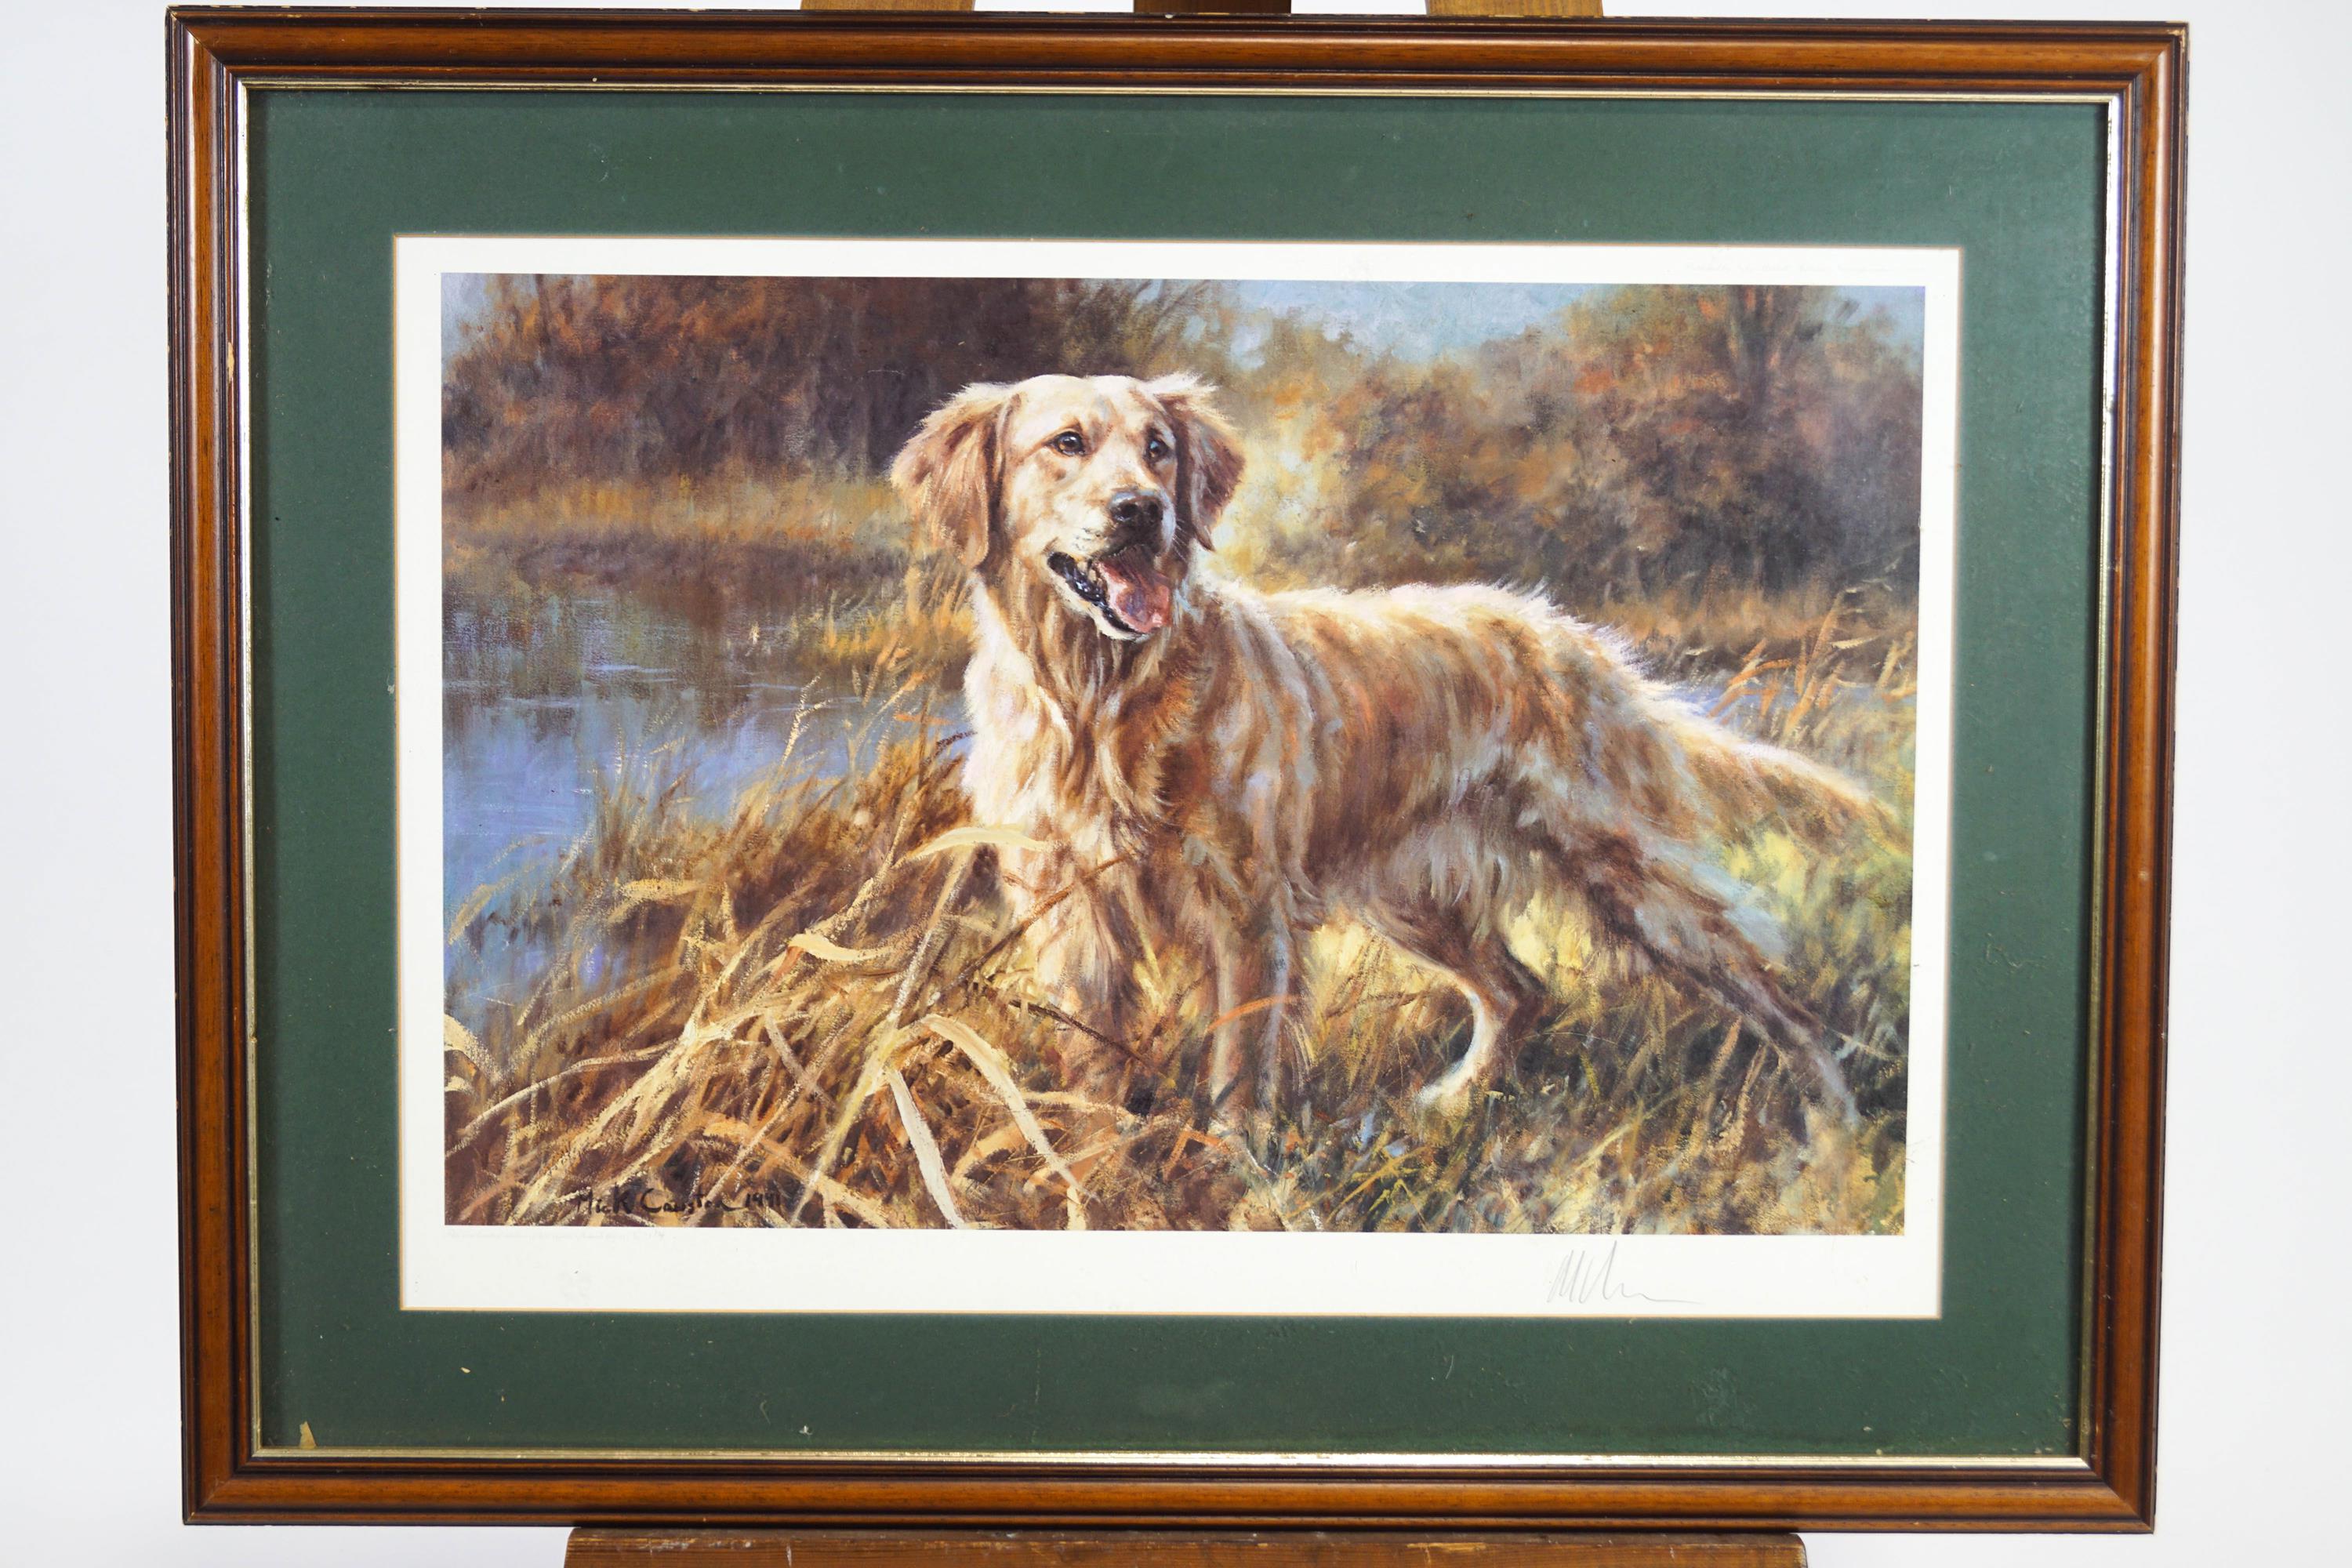 Four Golden Retriever prints, the largest after Mick Cawston, signed in pencil lower right, - Image 4 of 5